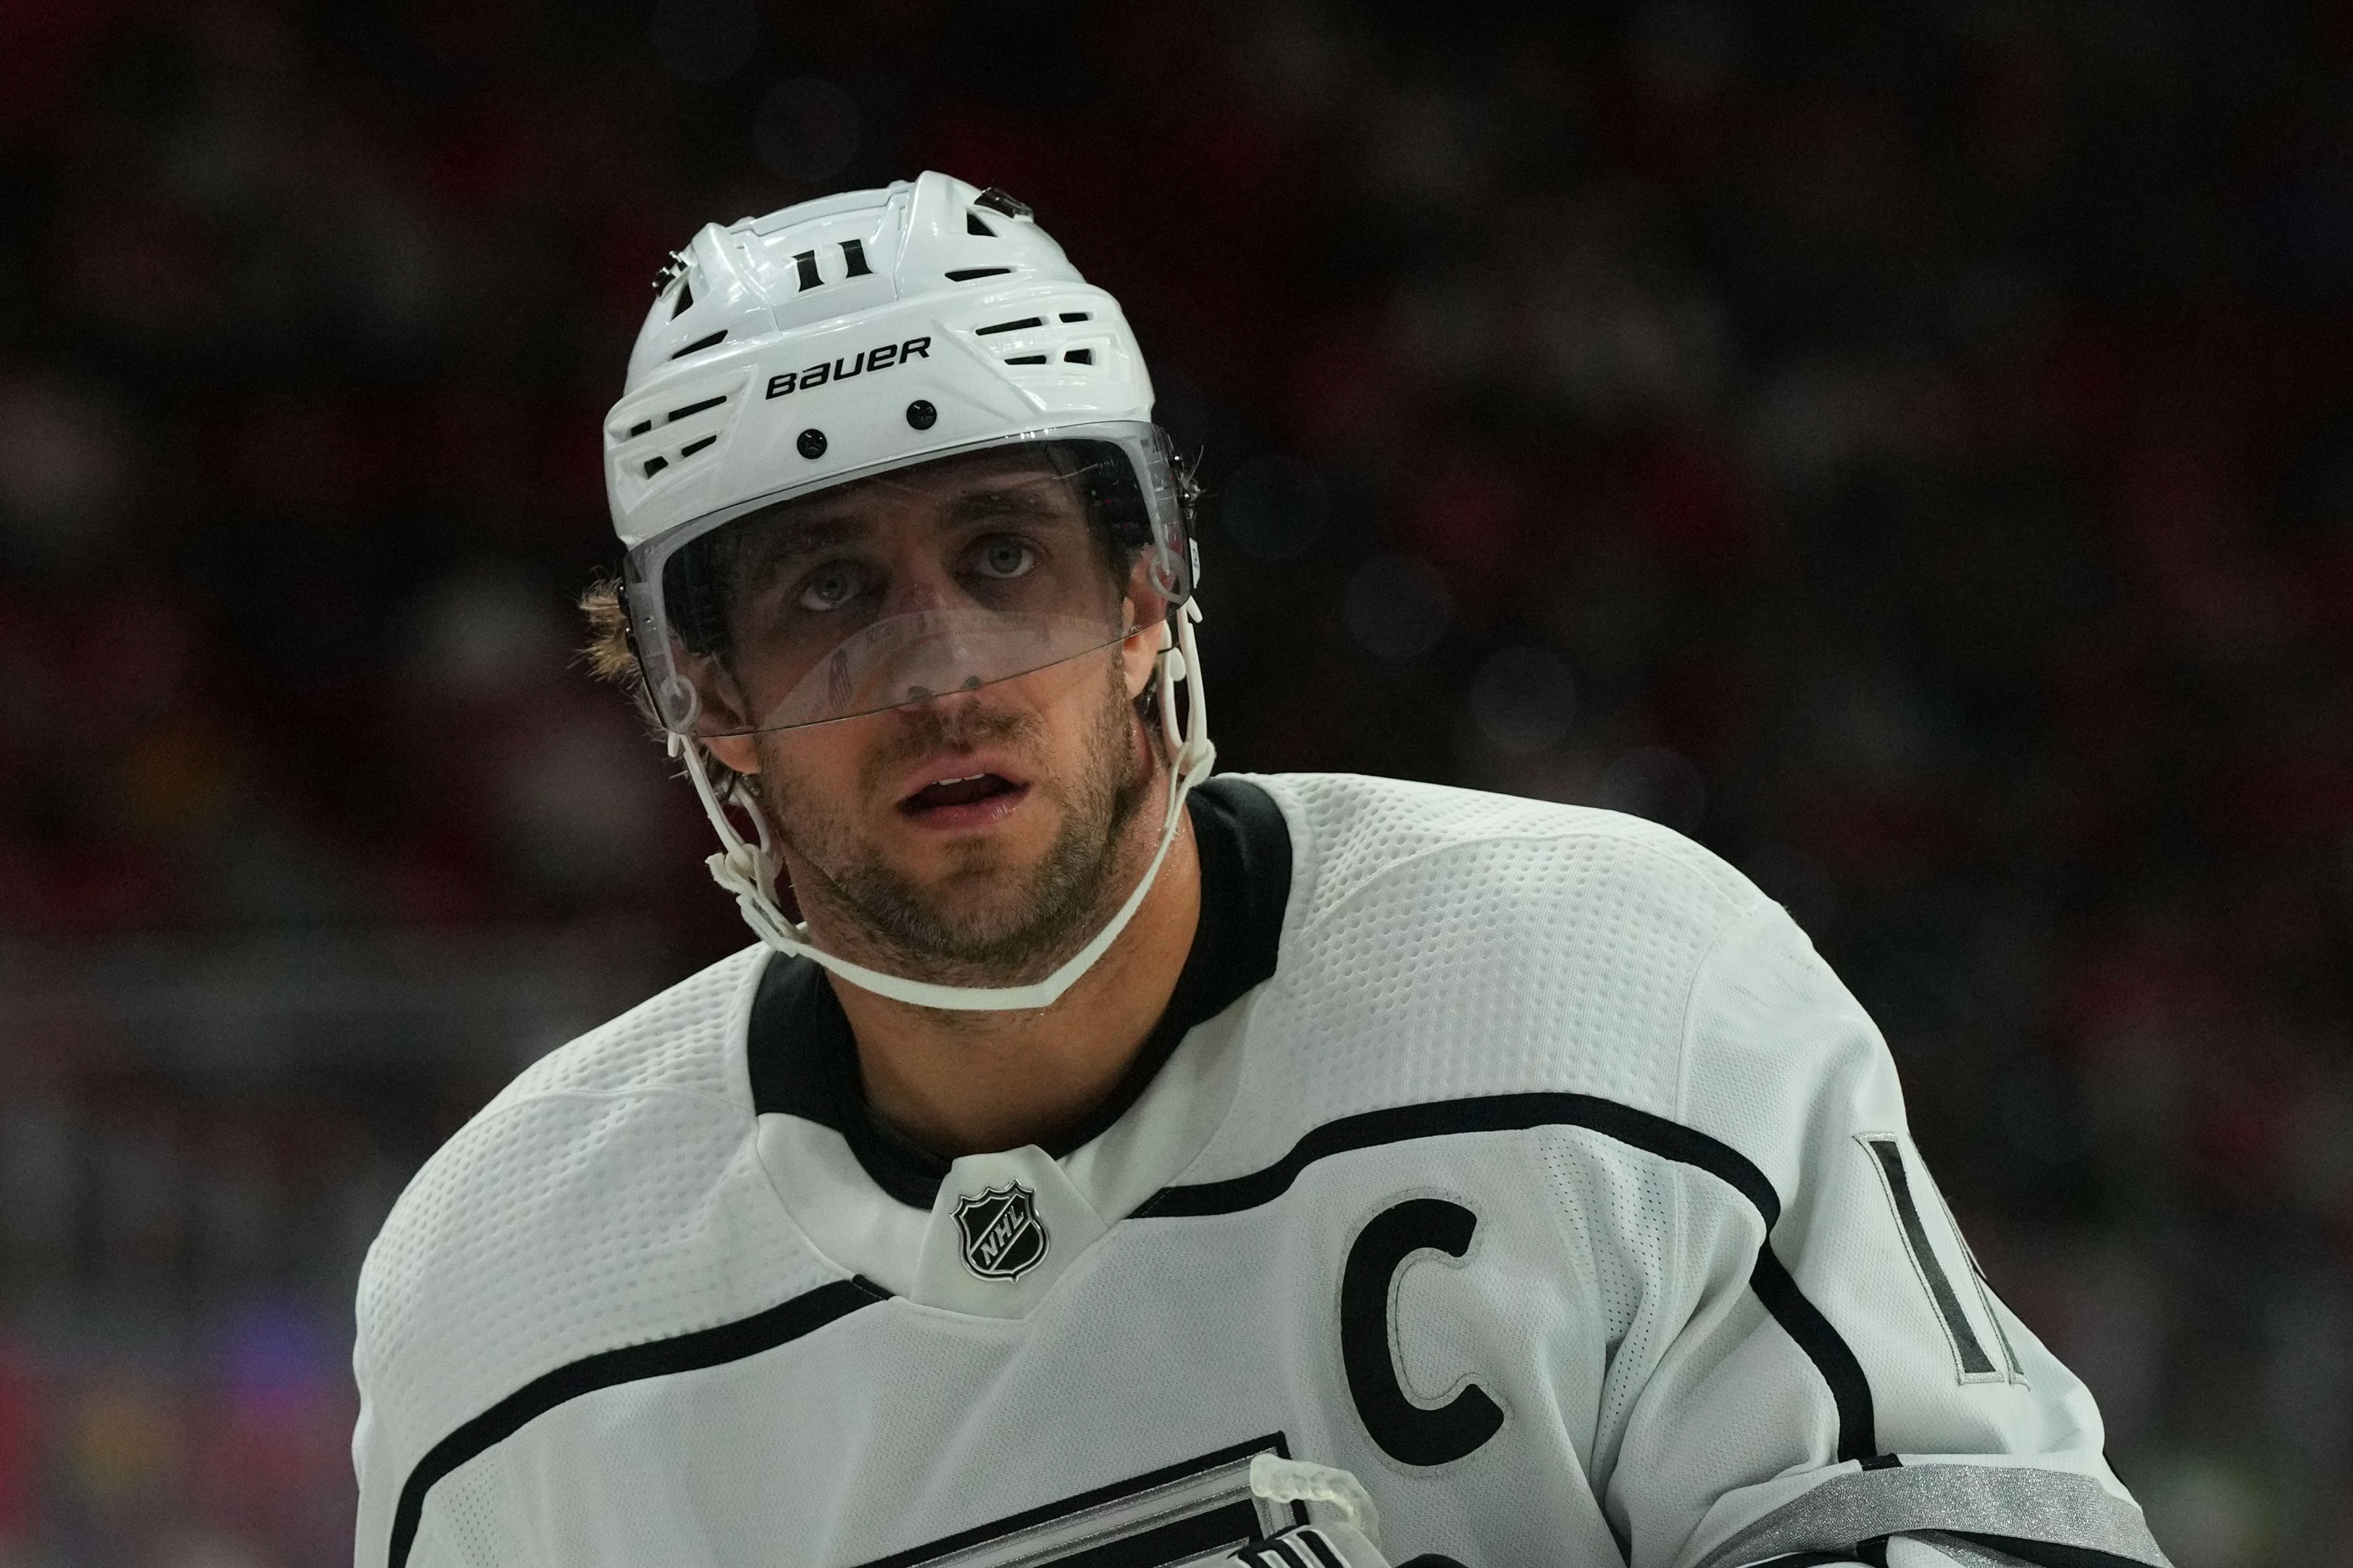 Which players have played for the LA Kings & Carolina Hurricanes